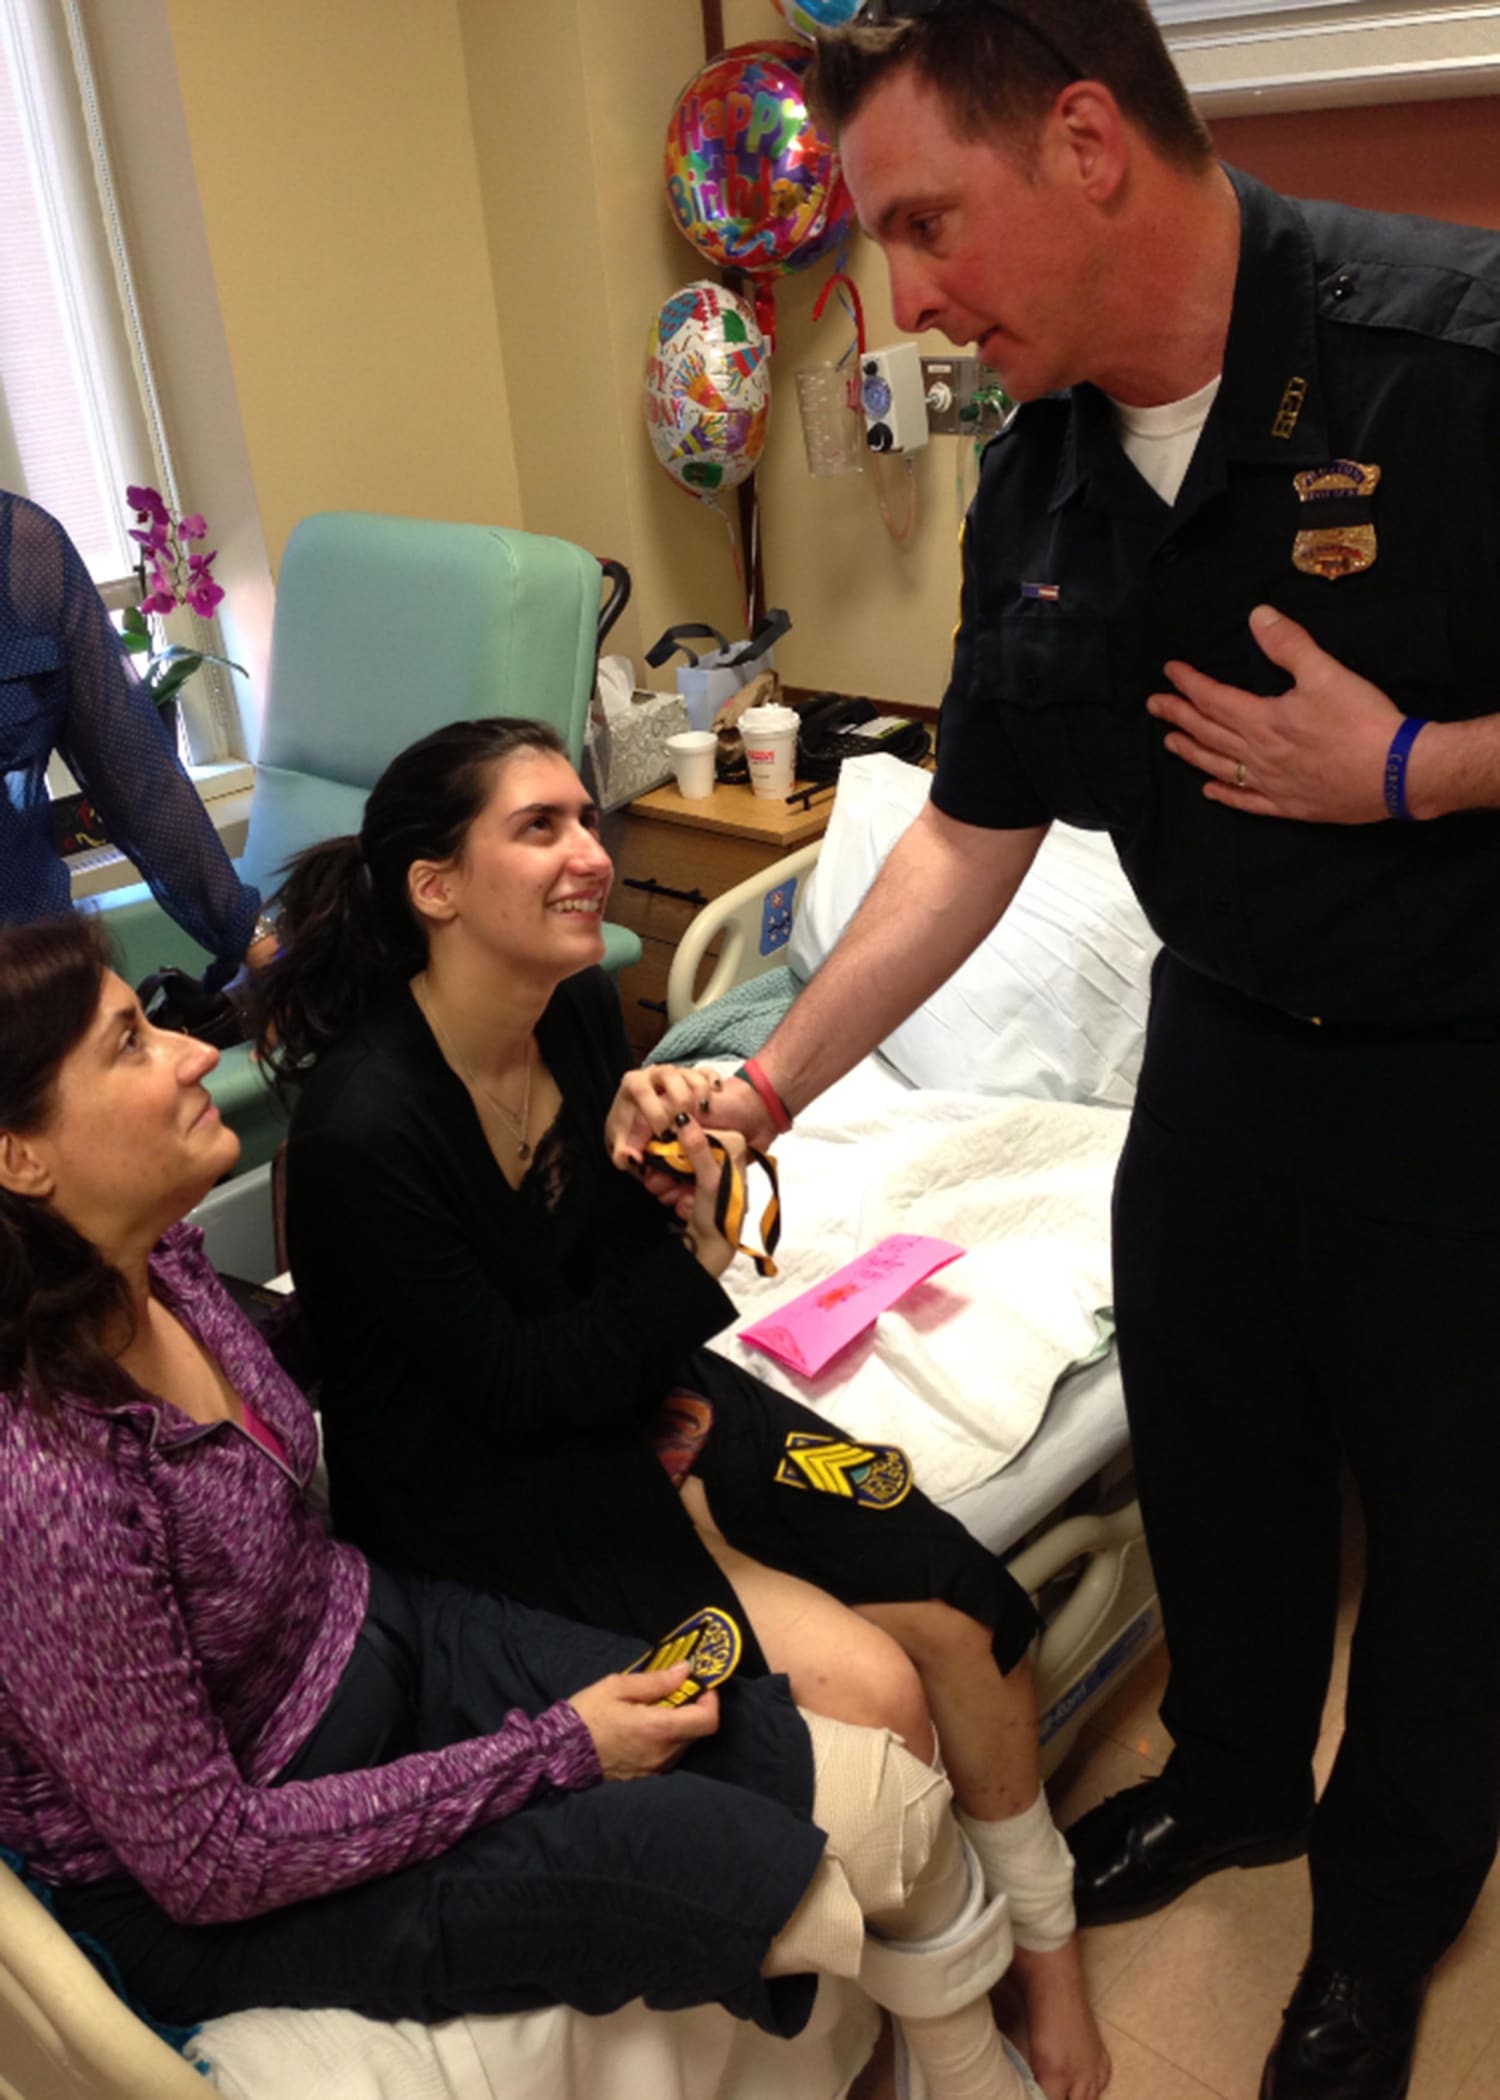 Image: Sydney Corcoran meets a first responder who helped her after the Boston Marathon bombing